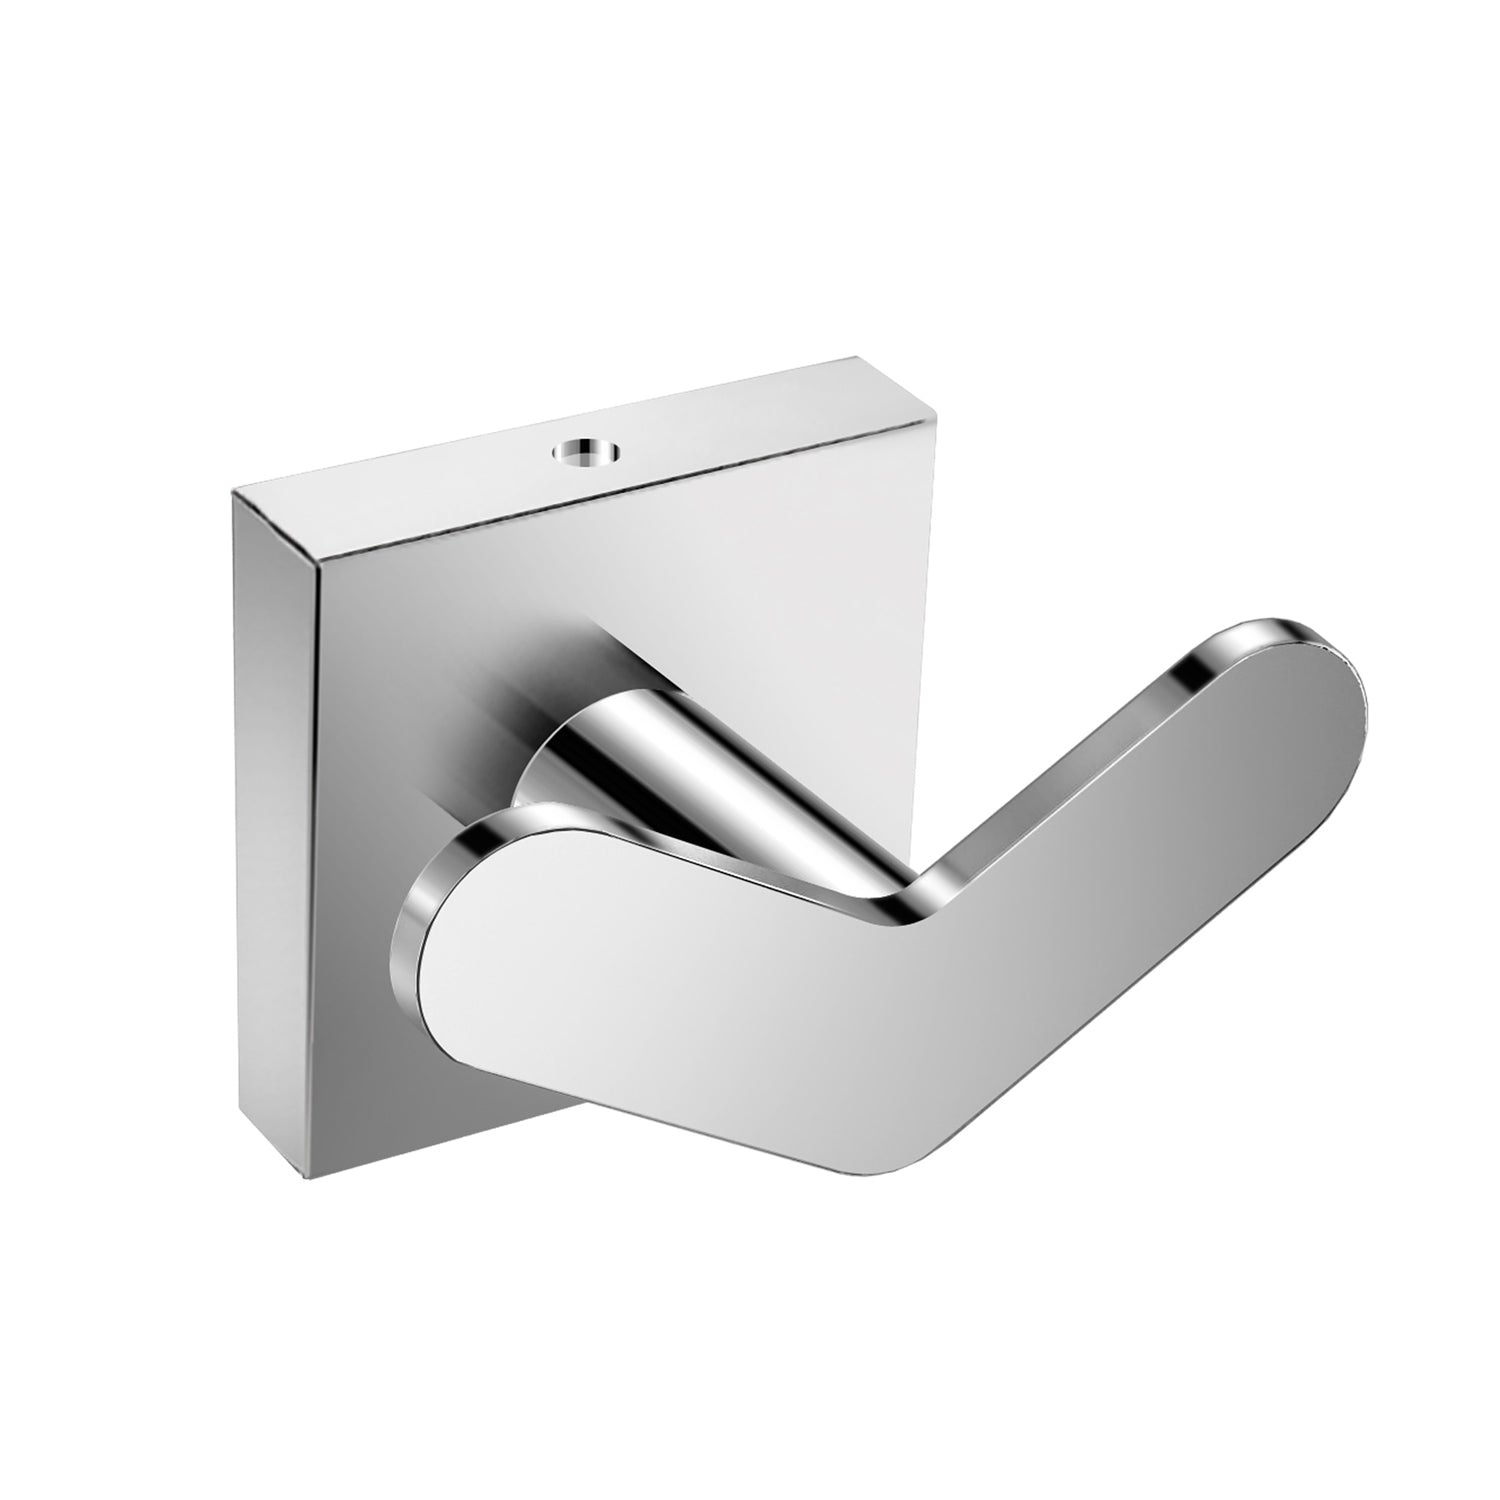 DAX Milano Towel Hook, Wall Mount Stainless Steel, Brushed Finish, 2-9/16 x 1-3/4 x 1-9/16 Inches (DAX-GDC160122-BN)